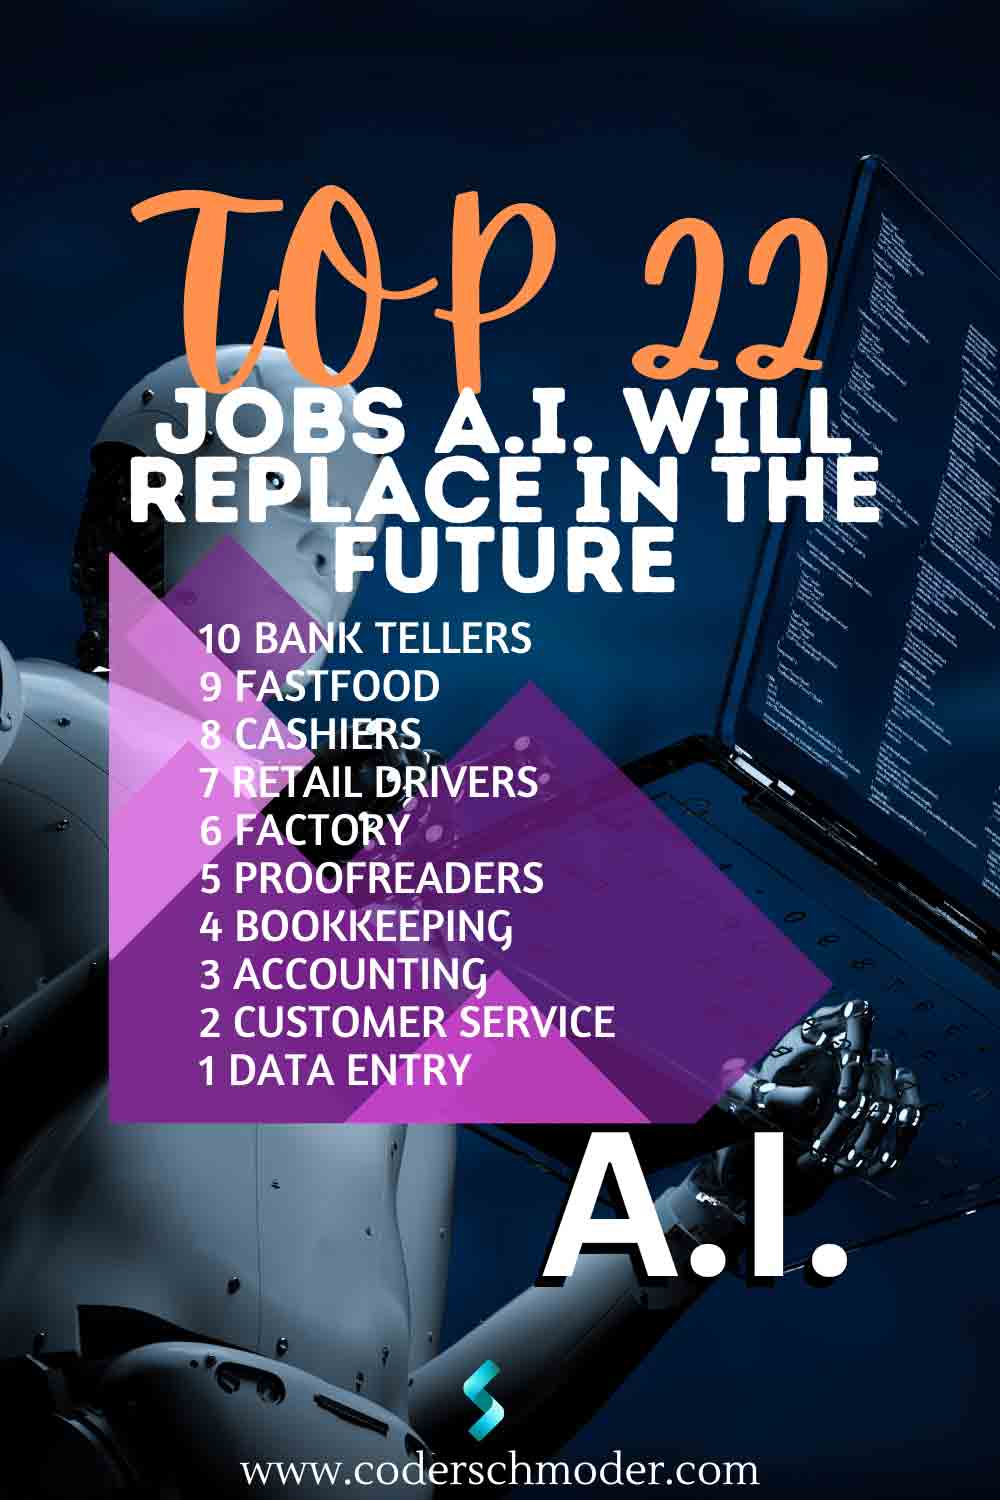 Top 22 Jobs That A.I. Will Replace in the Future